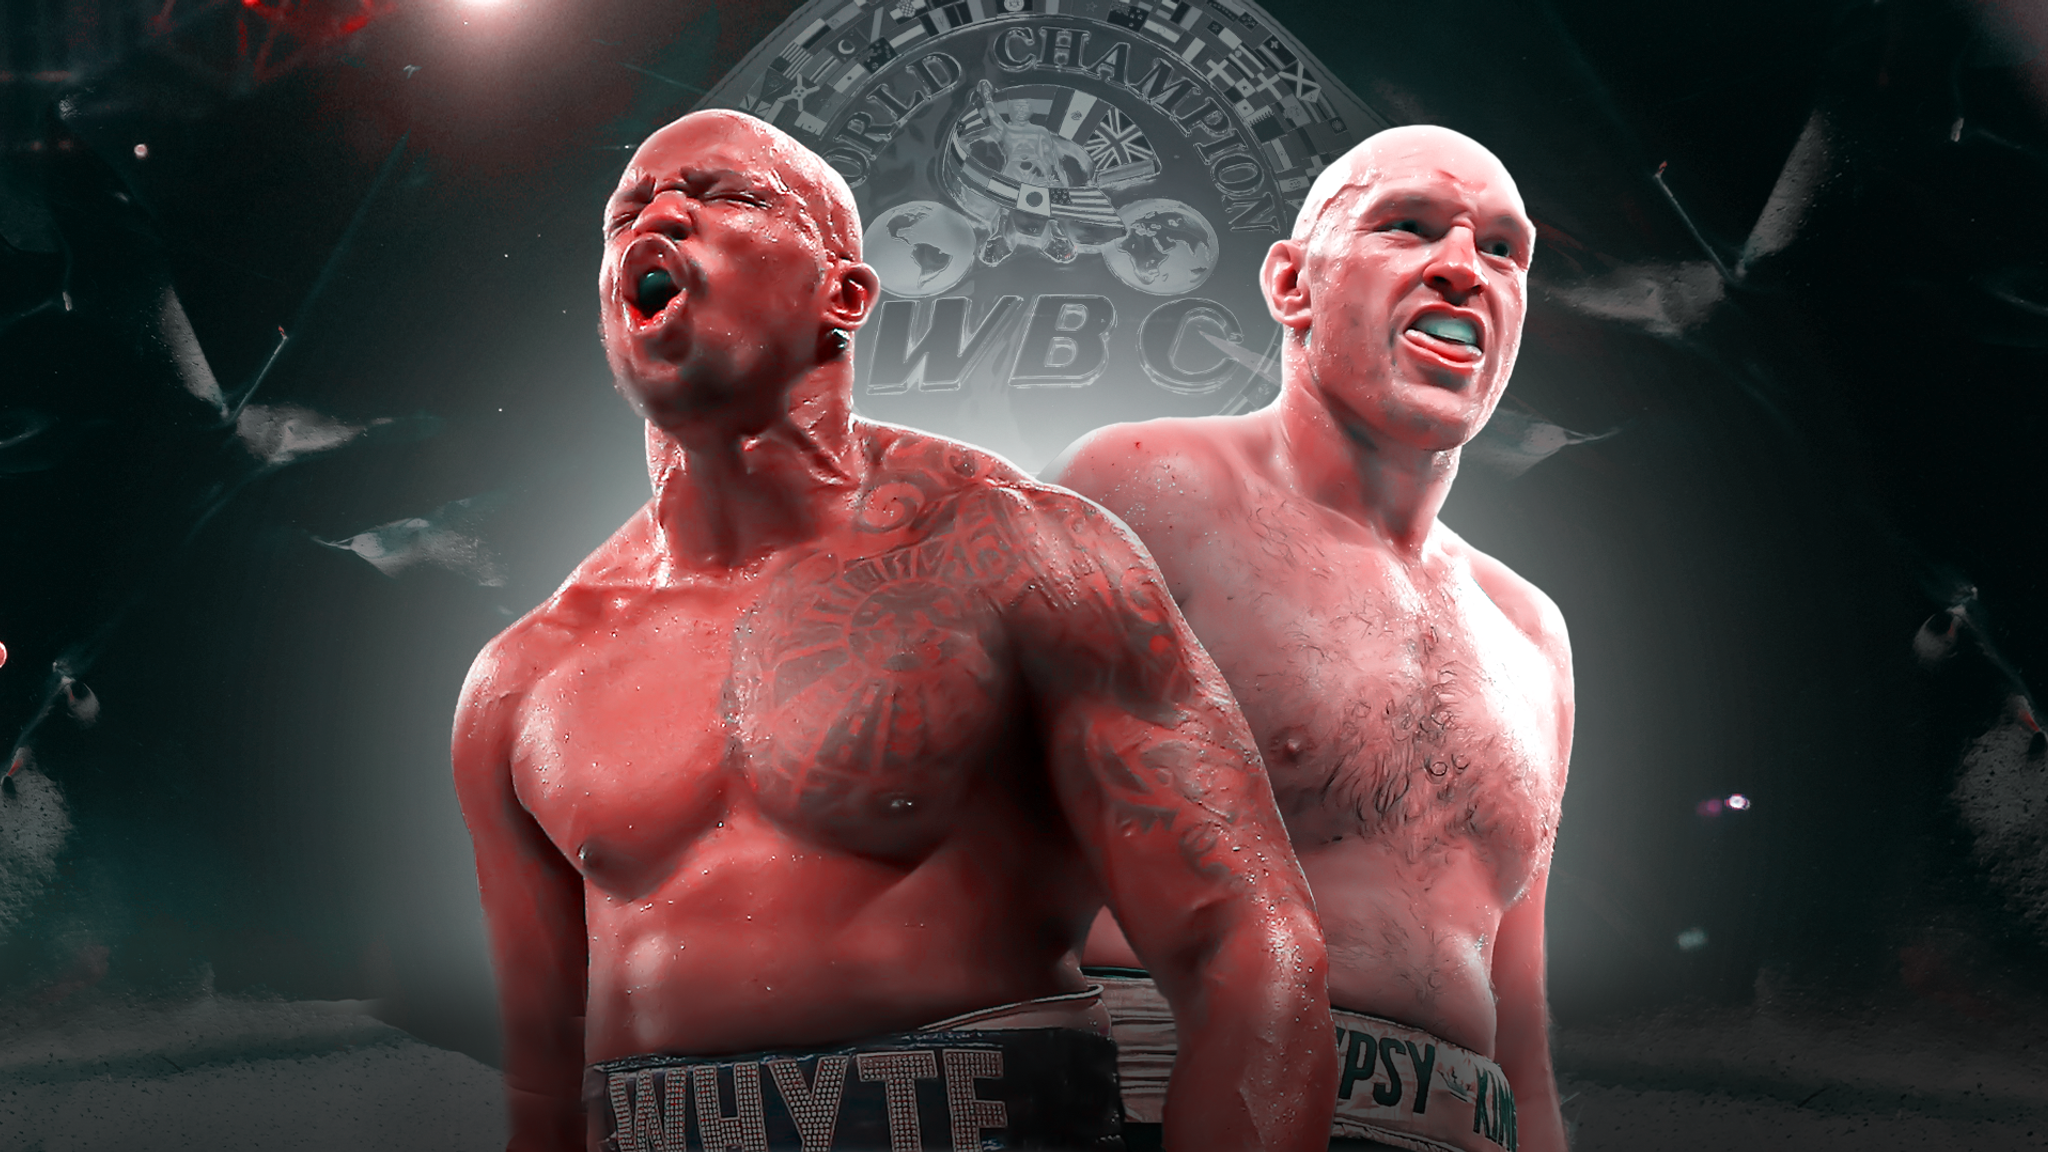 Tyson Fury must face Dillian Whyte next if he defeats Deontay Wilder again, WBC confirms Boxing News Sky Sports